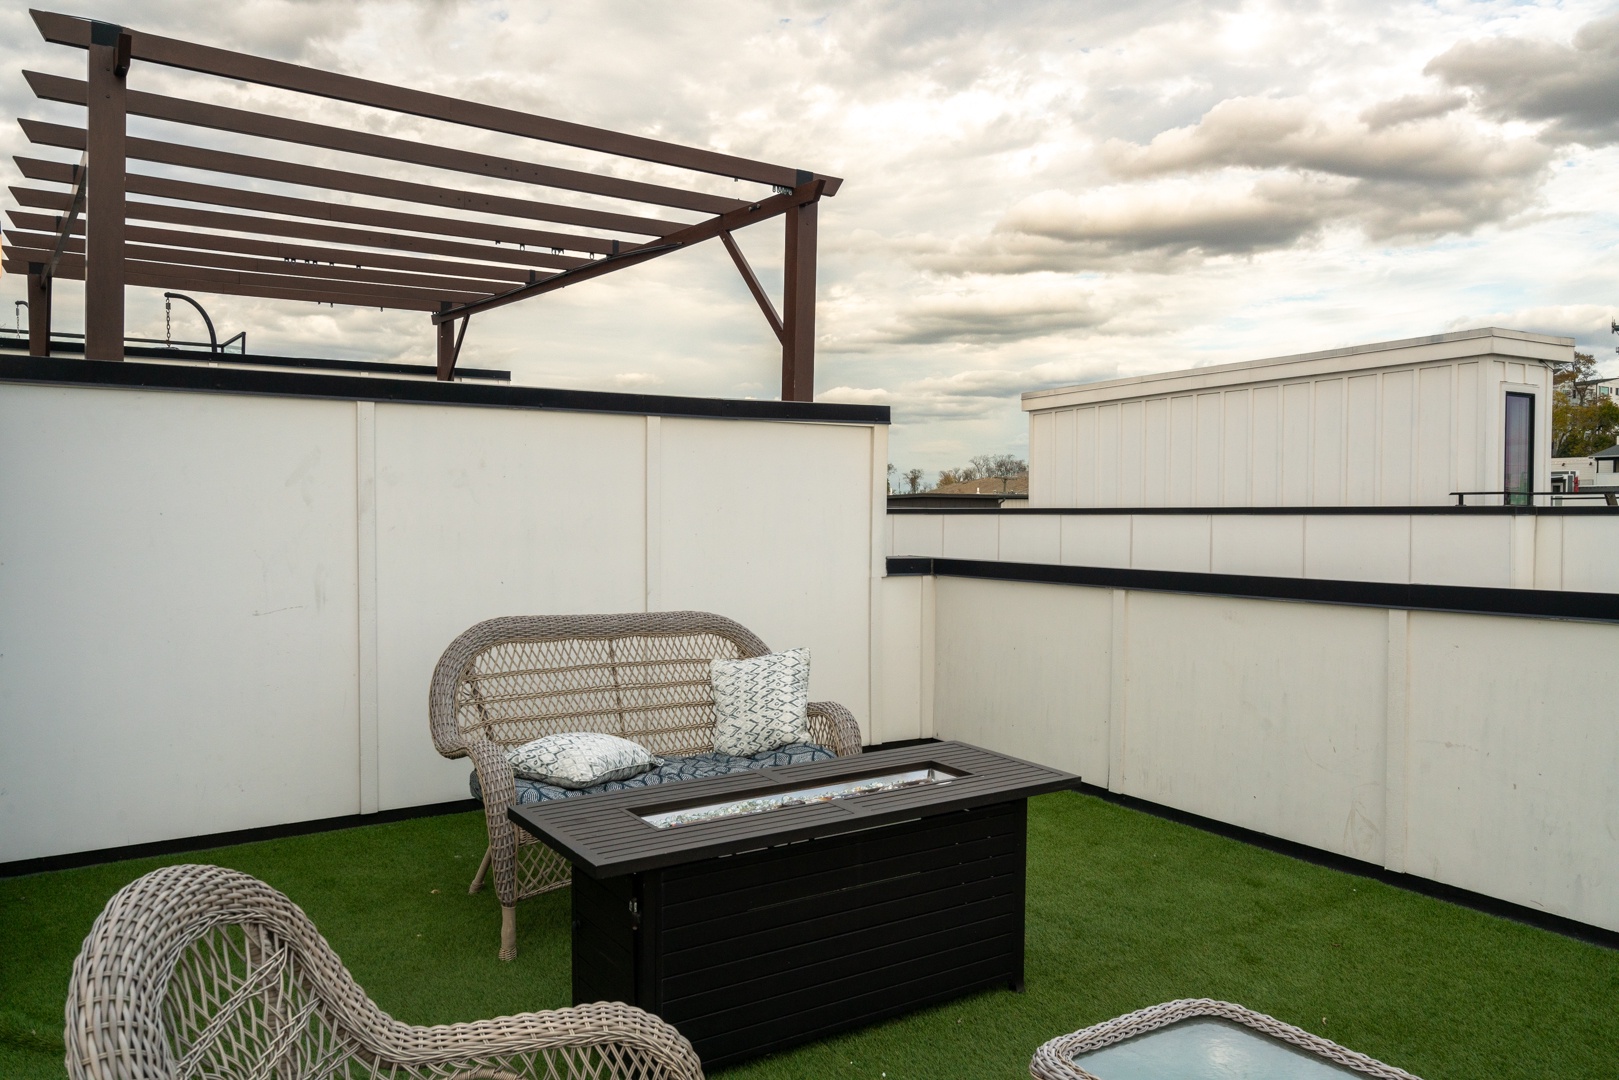 Rooftop deck with outdoor seating, firepit, corn hole, and grill